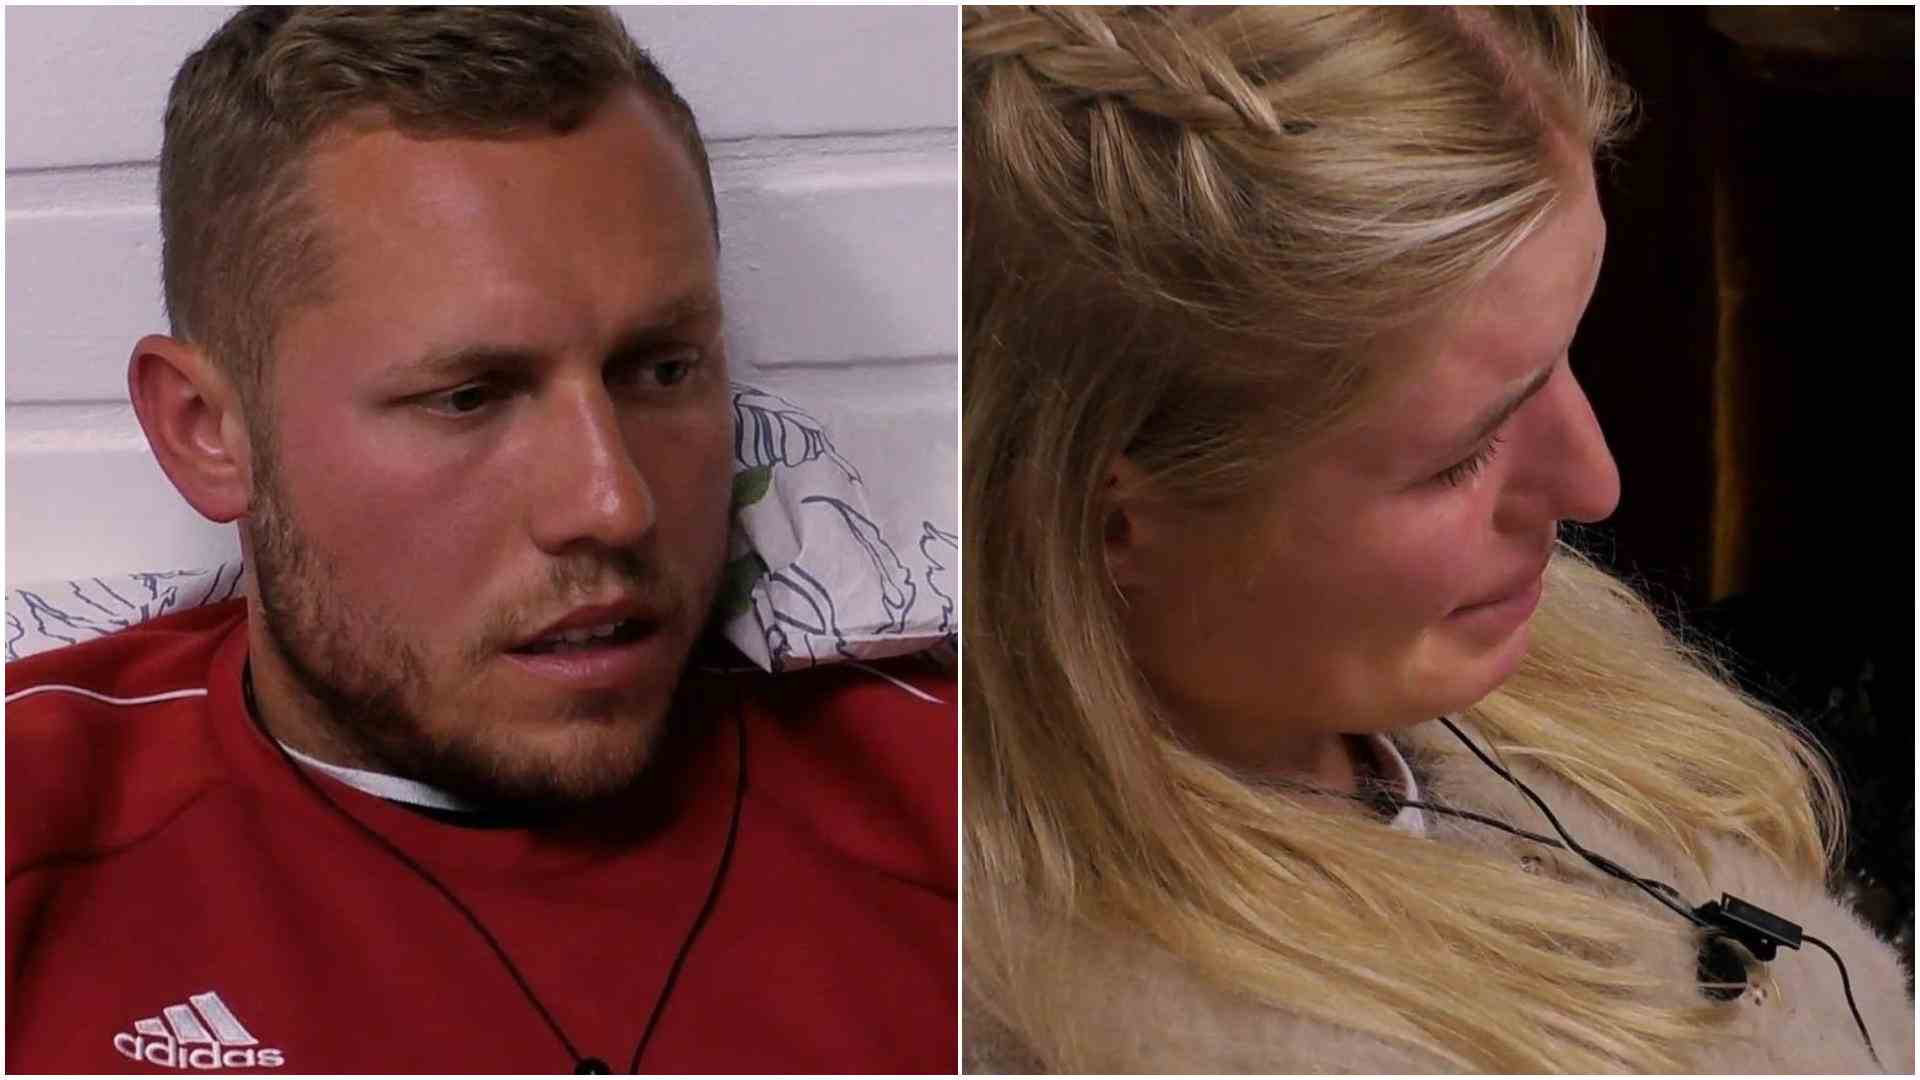 The farmer relationship drama is entering the third round Antonia is crying & Patrick is annoying!